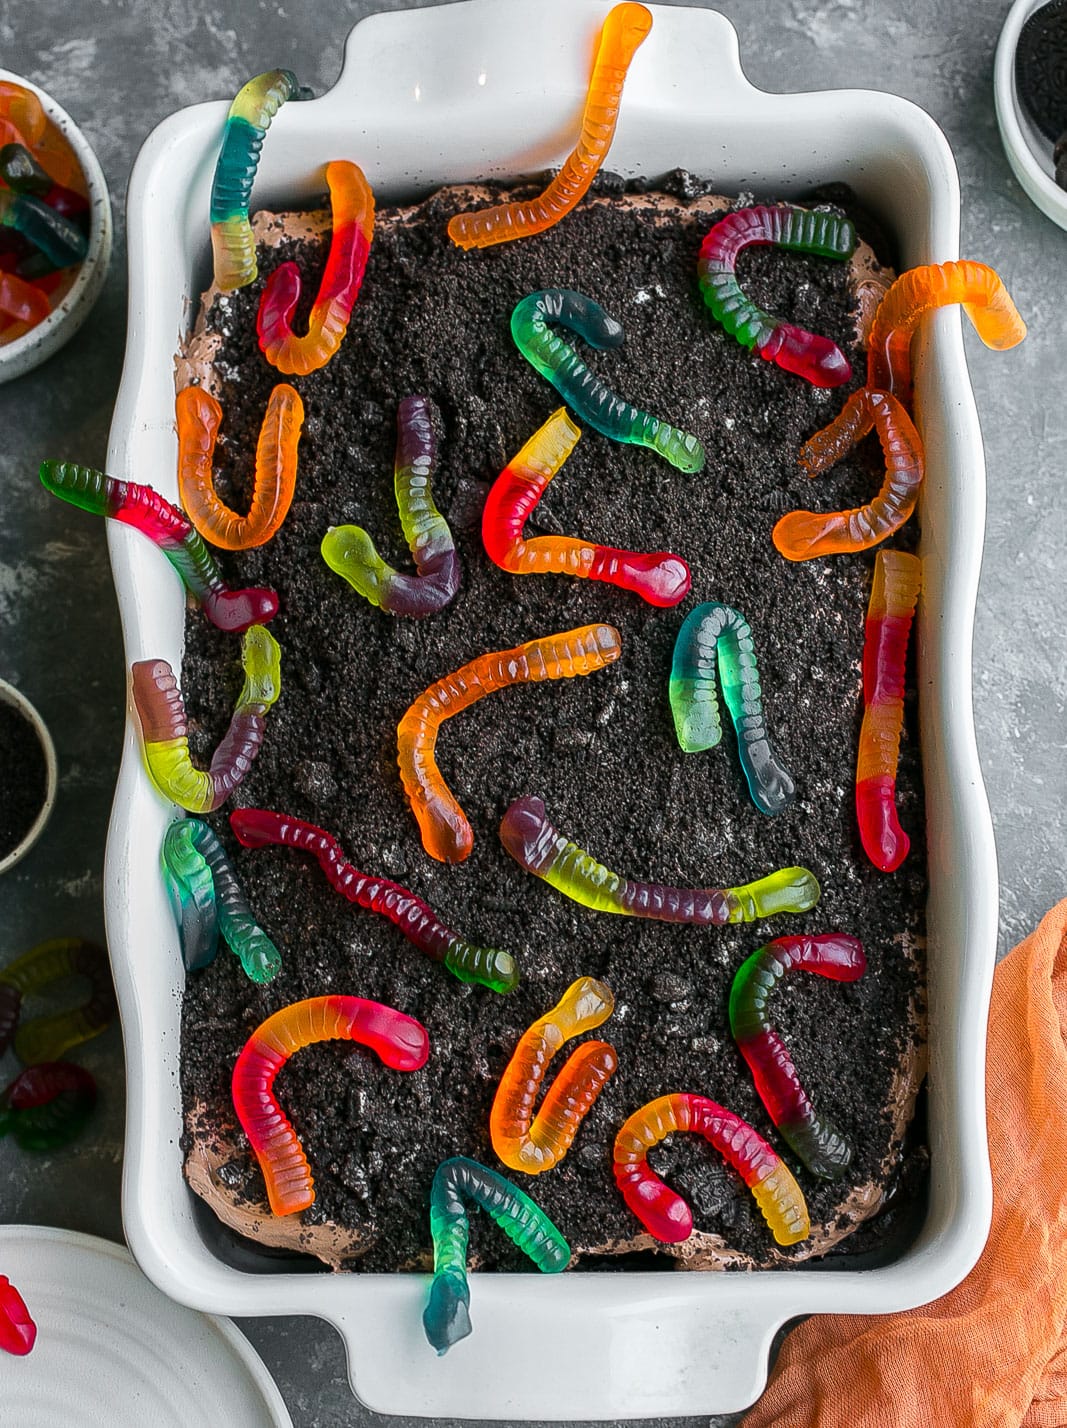 Oreo Dirt Cake with worms.